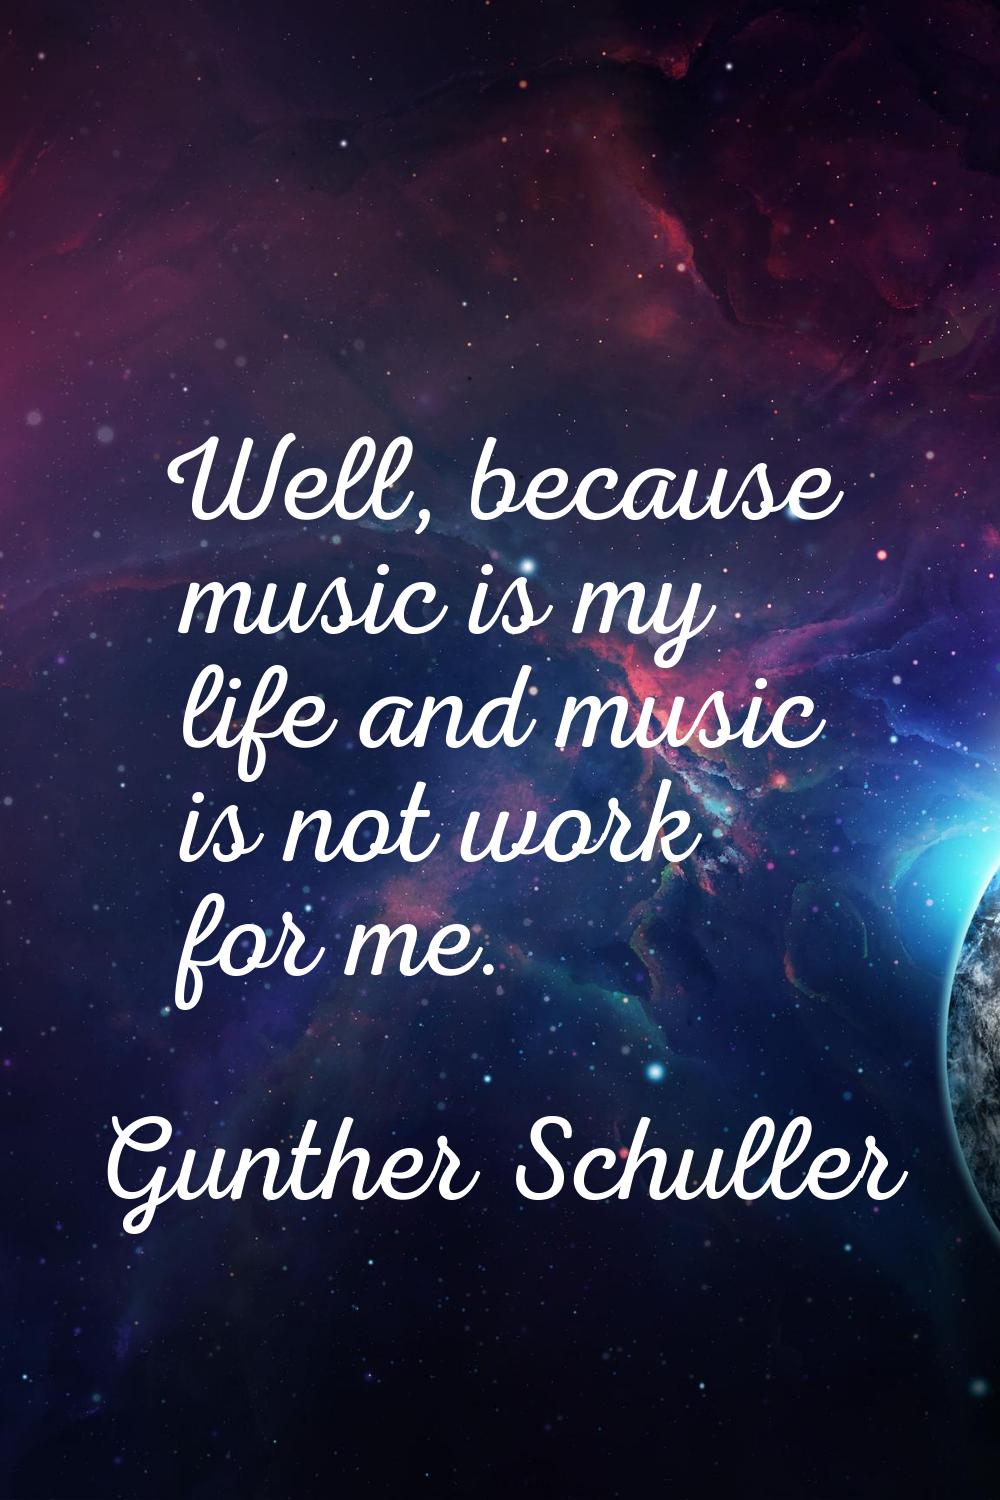 Well, because music is my life and music is not work for me.